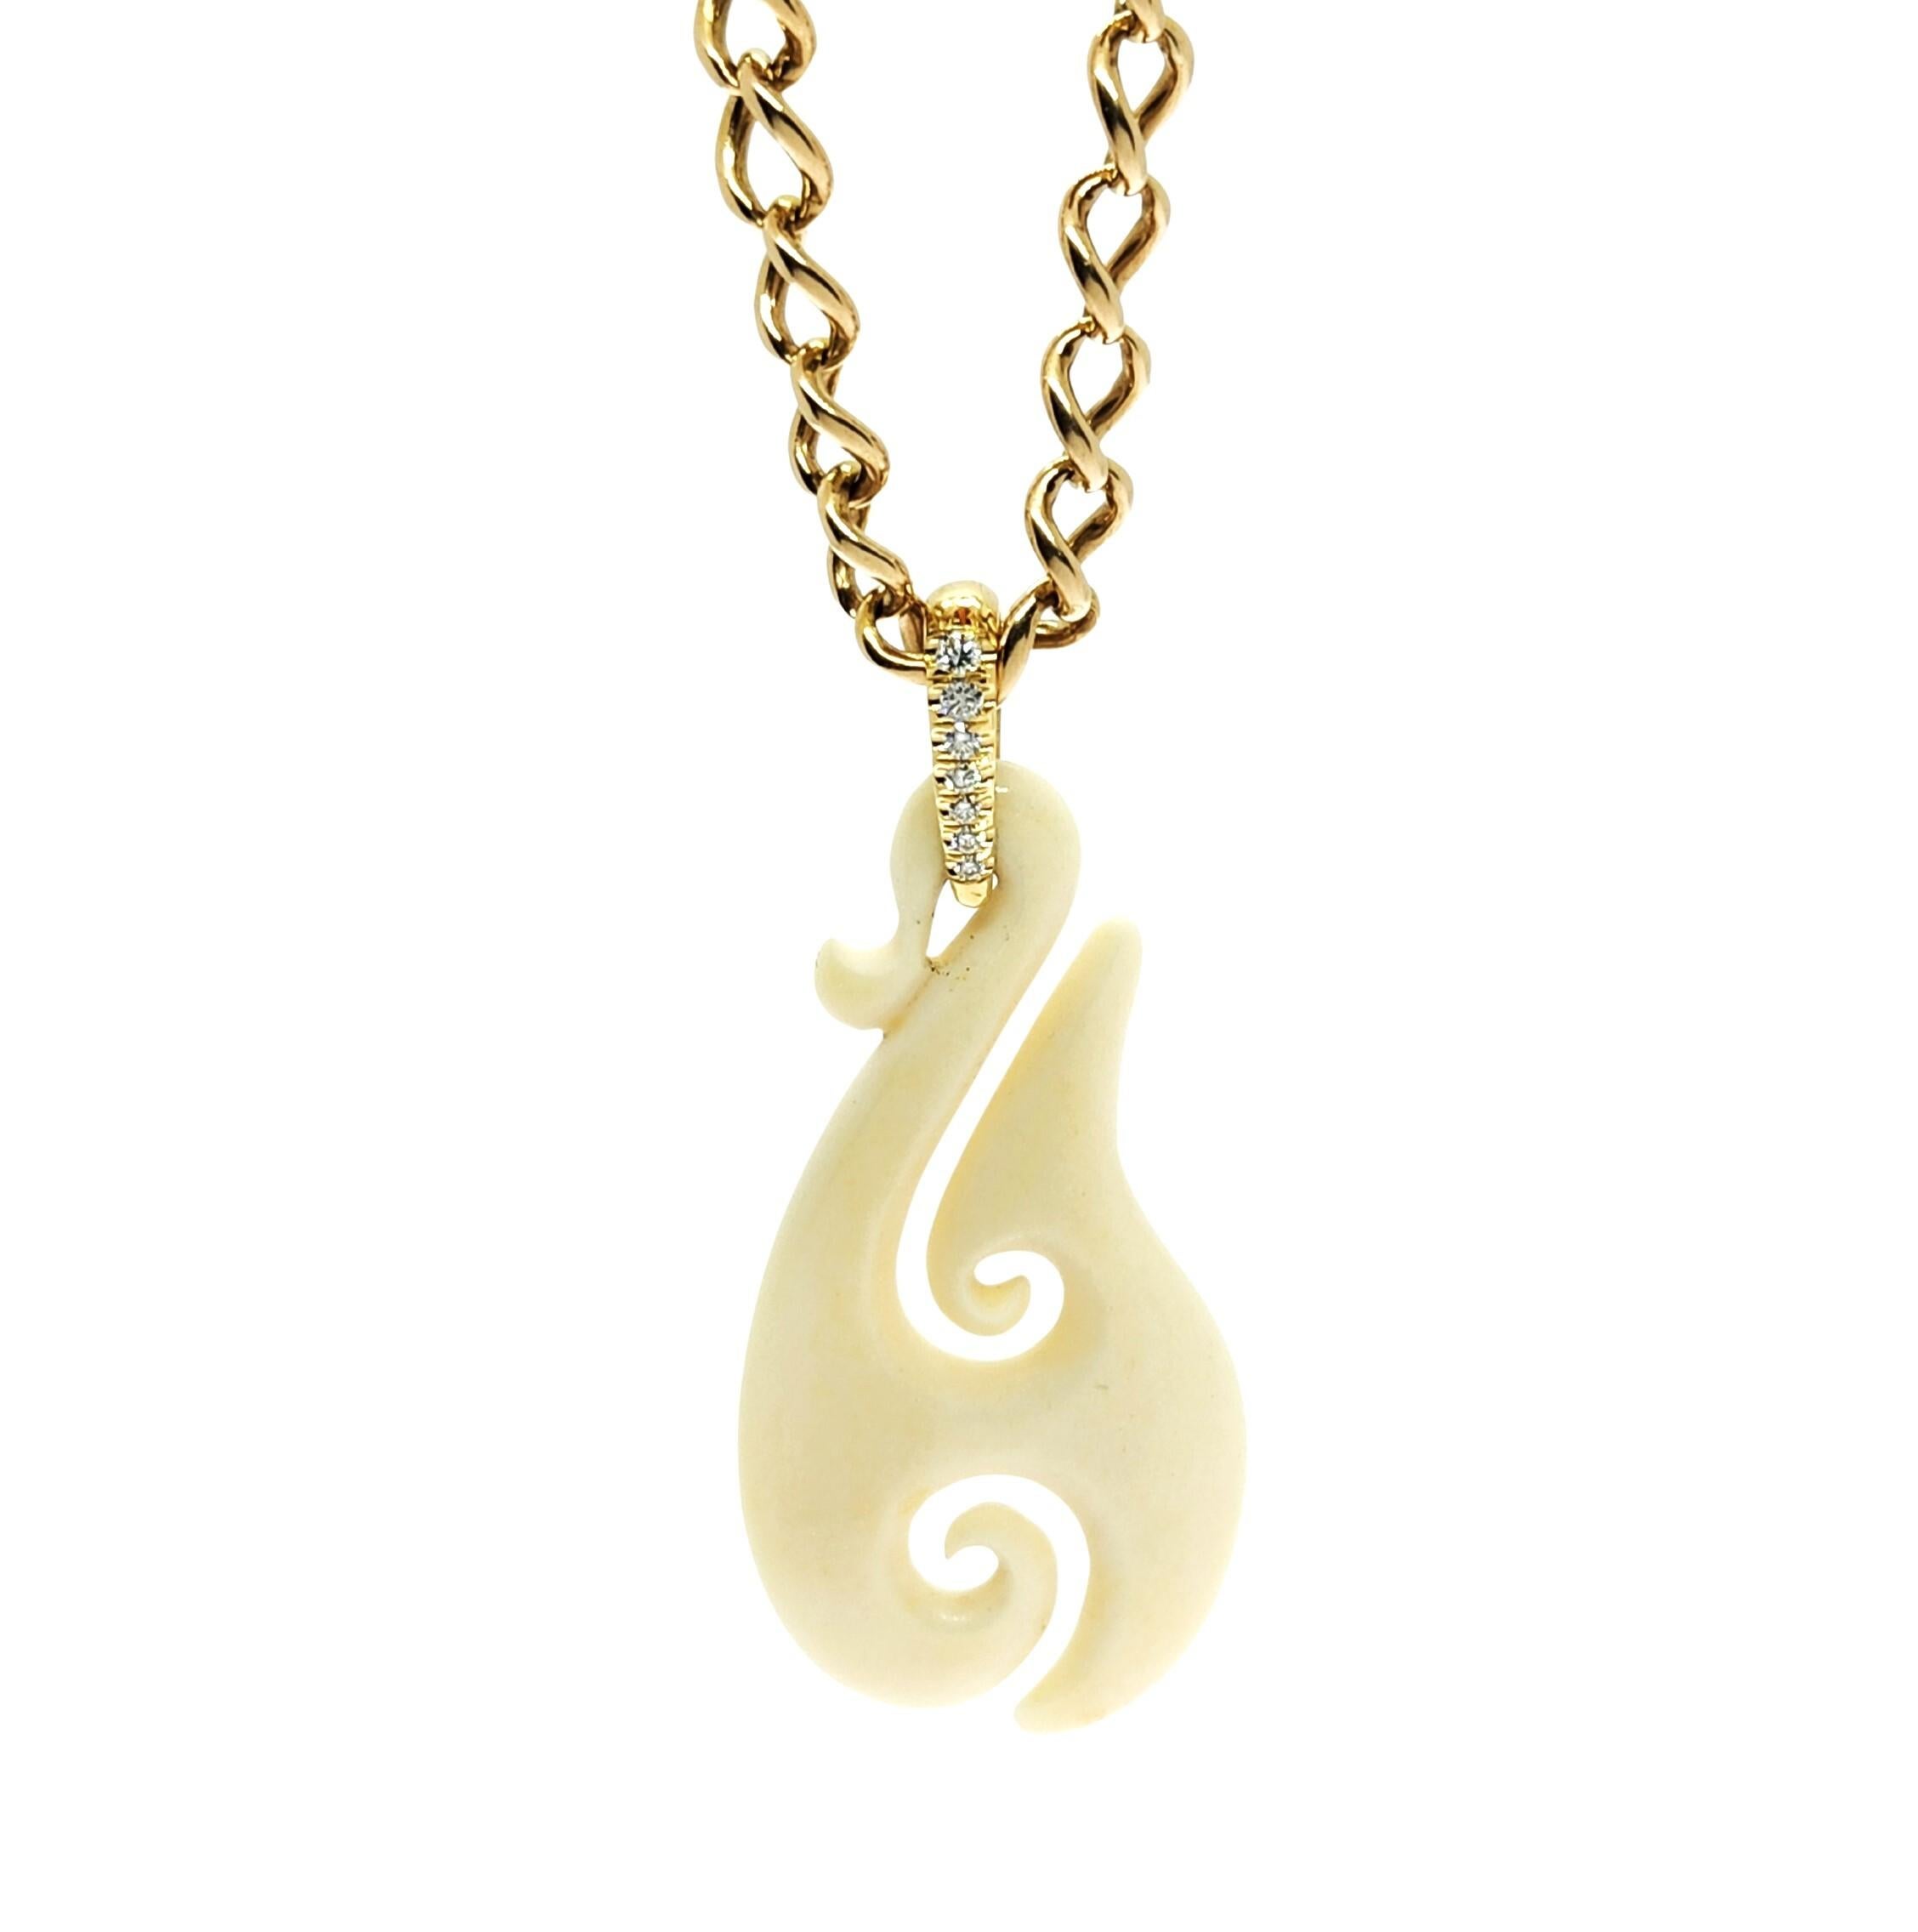 Iconic Sailors Hook in Vintage hand carved bone with a night sky sparkle diamond bail handmade in 18K yellow gold with 7 Diamonds totalling .15cttw. Calling all sailors, beach goers, sun worshippers, summer lovers. One of a kind carving, a rich